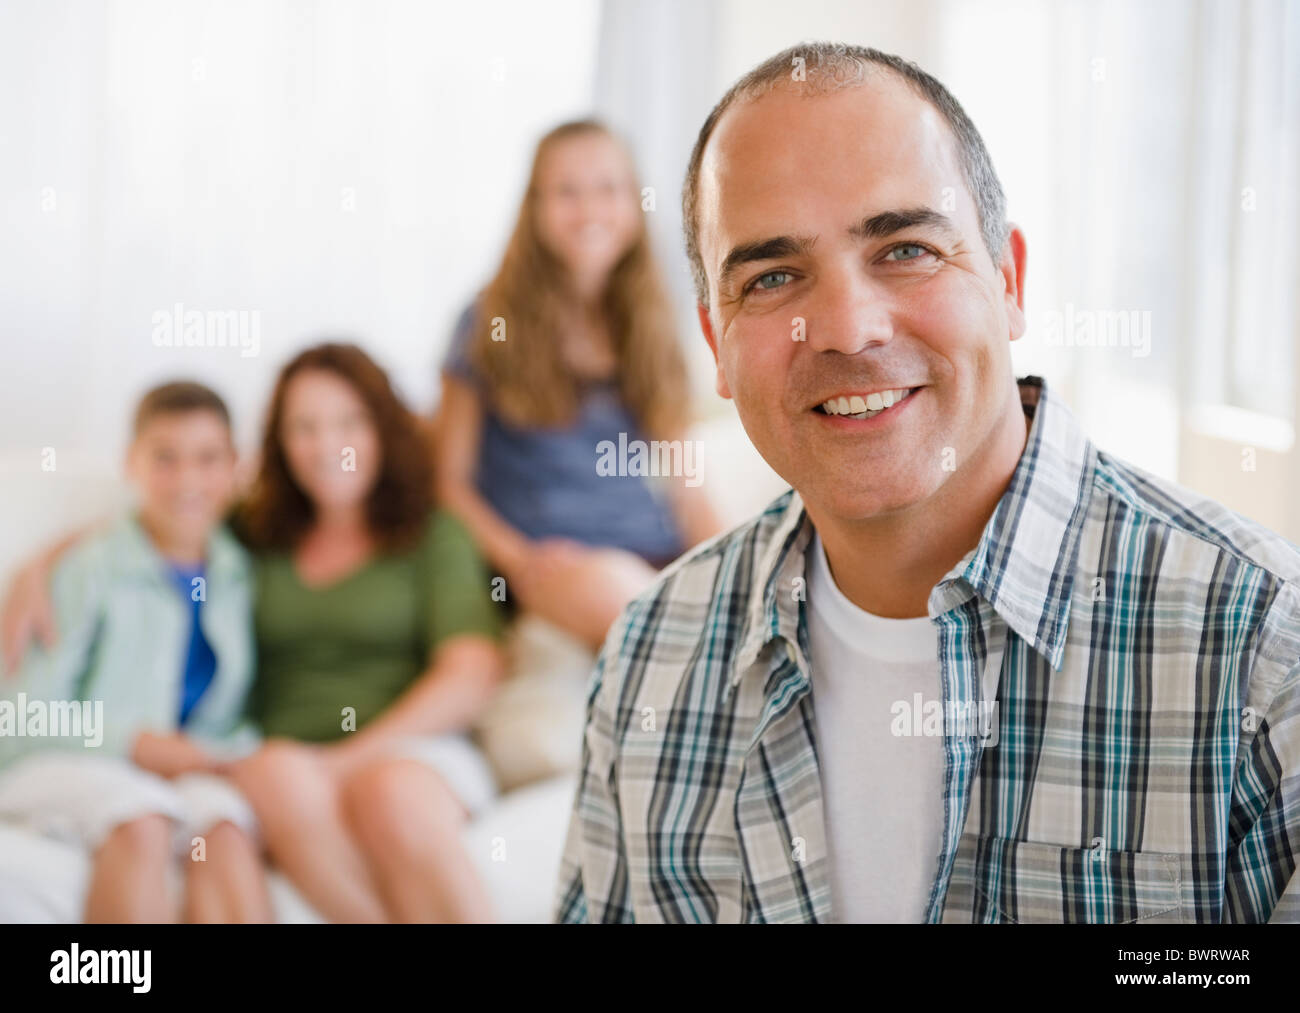 Smiling Hispanic man with family in background Banque D'Images